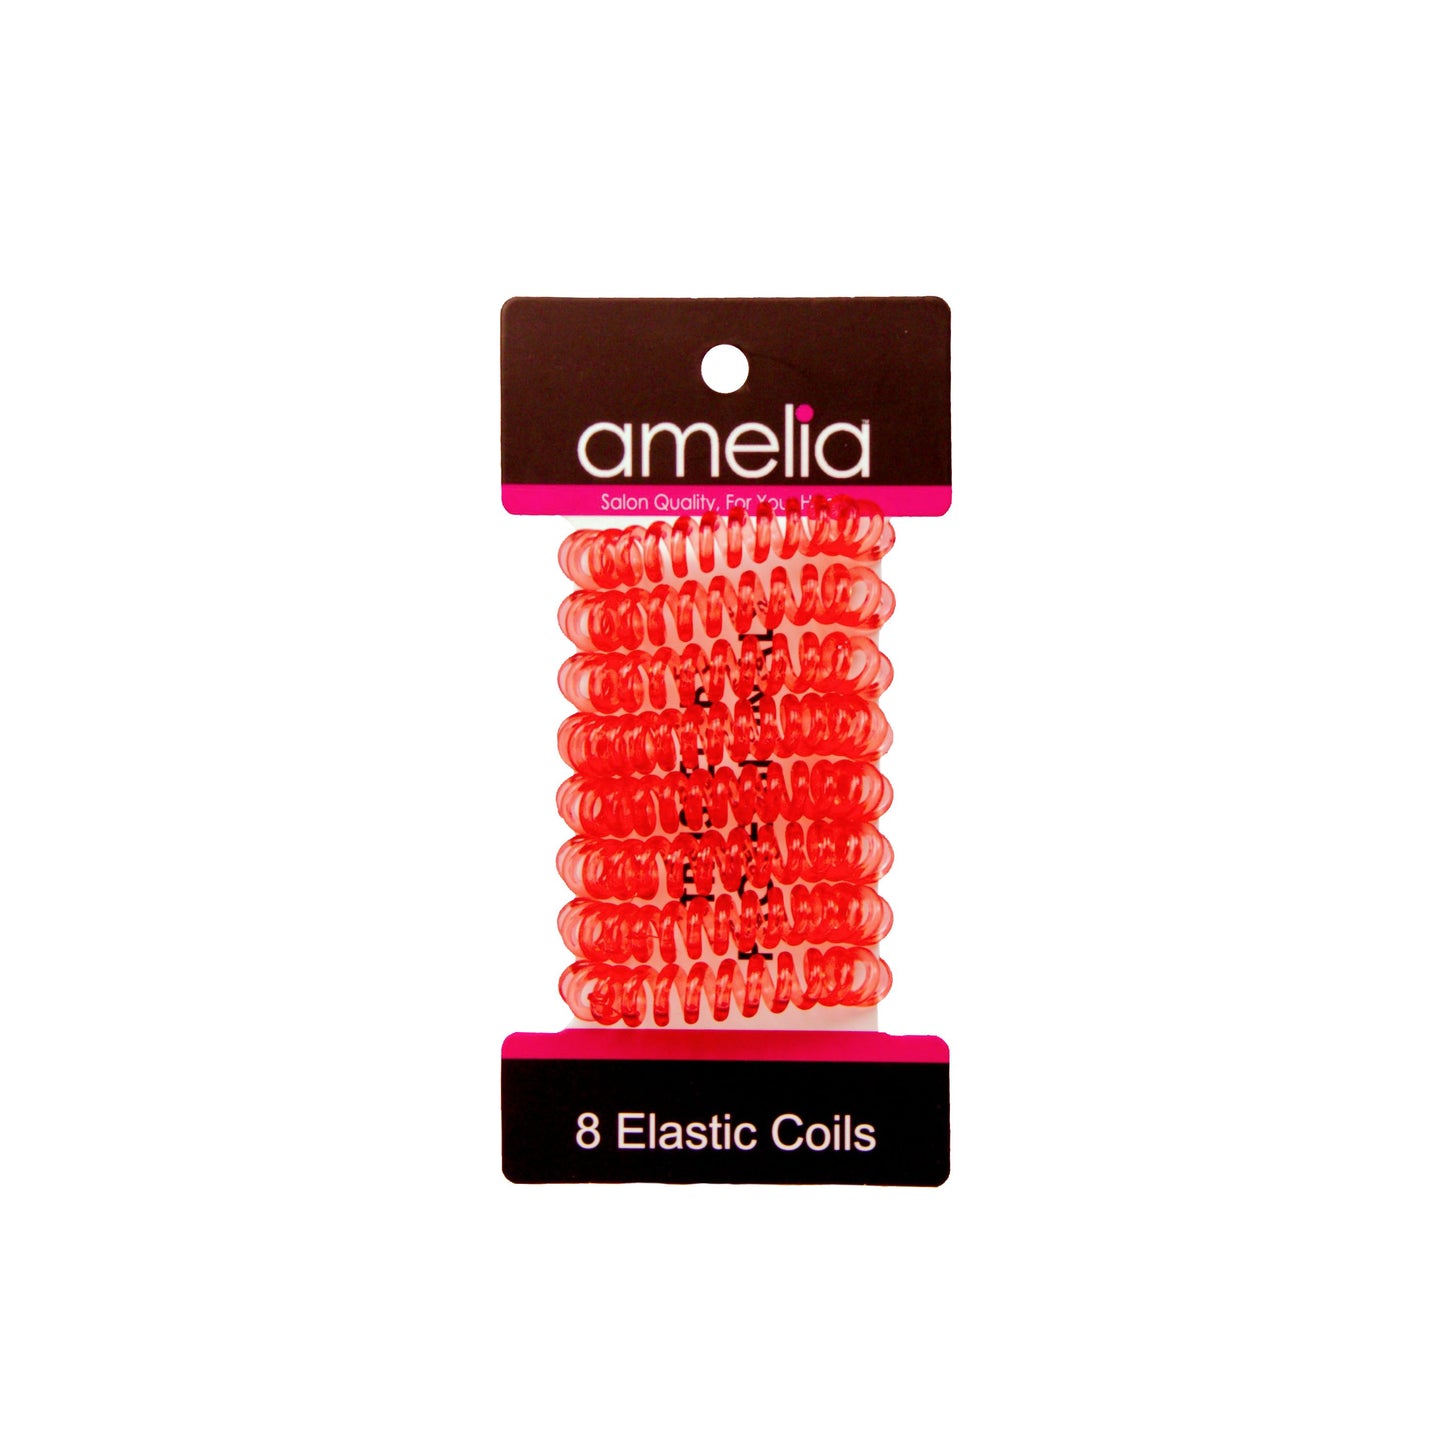 Amelia Beauty Products 8 Small Elastic Hair Coils, 1.5in Diameter Thick Spiral Hair Ties, Gentle on Hair, Strong Hold and Minimizes Dents and Creases, Red